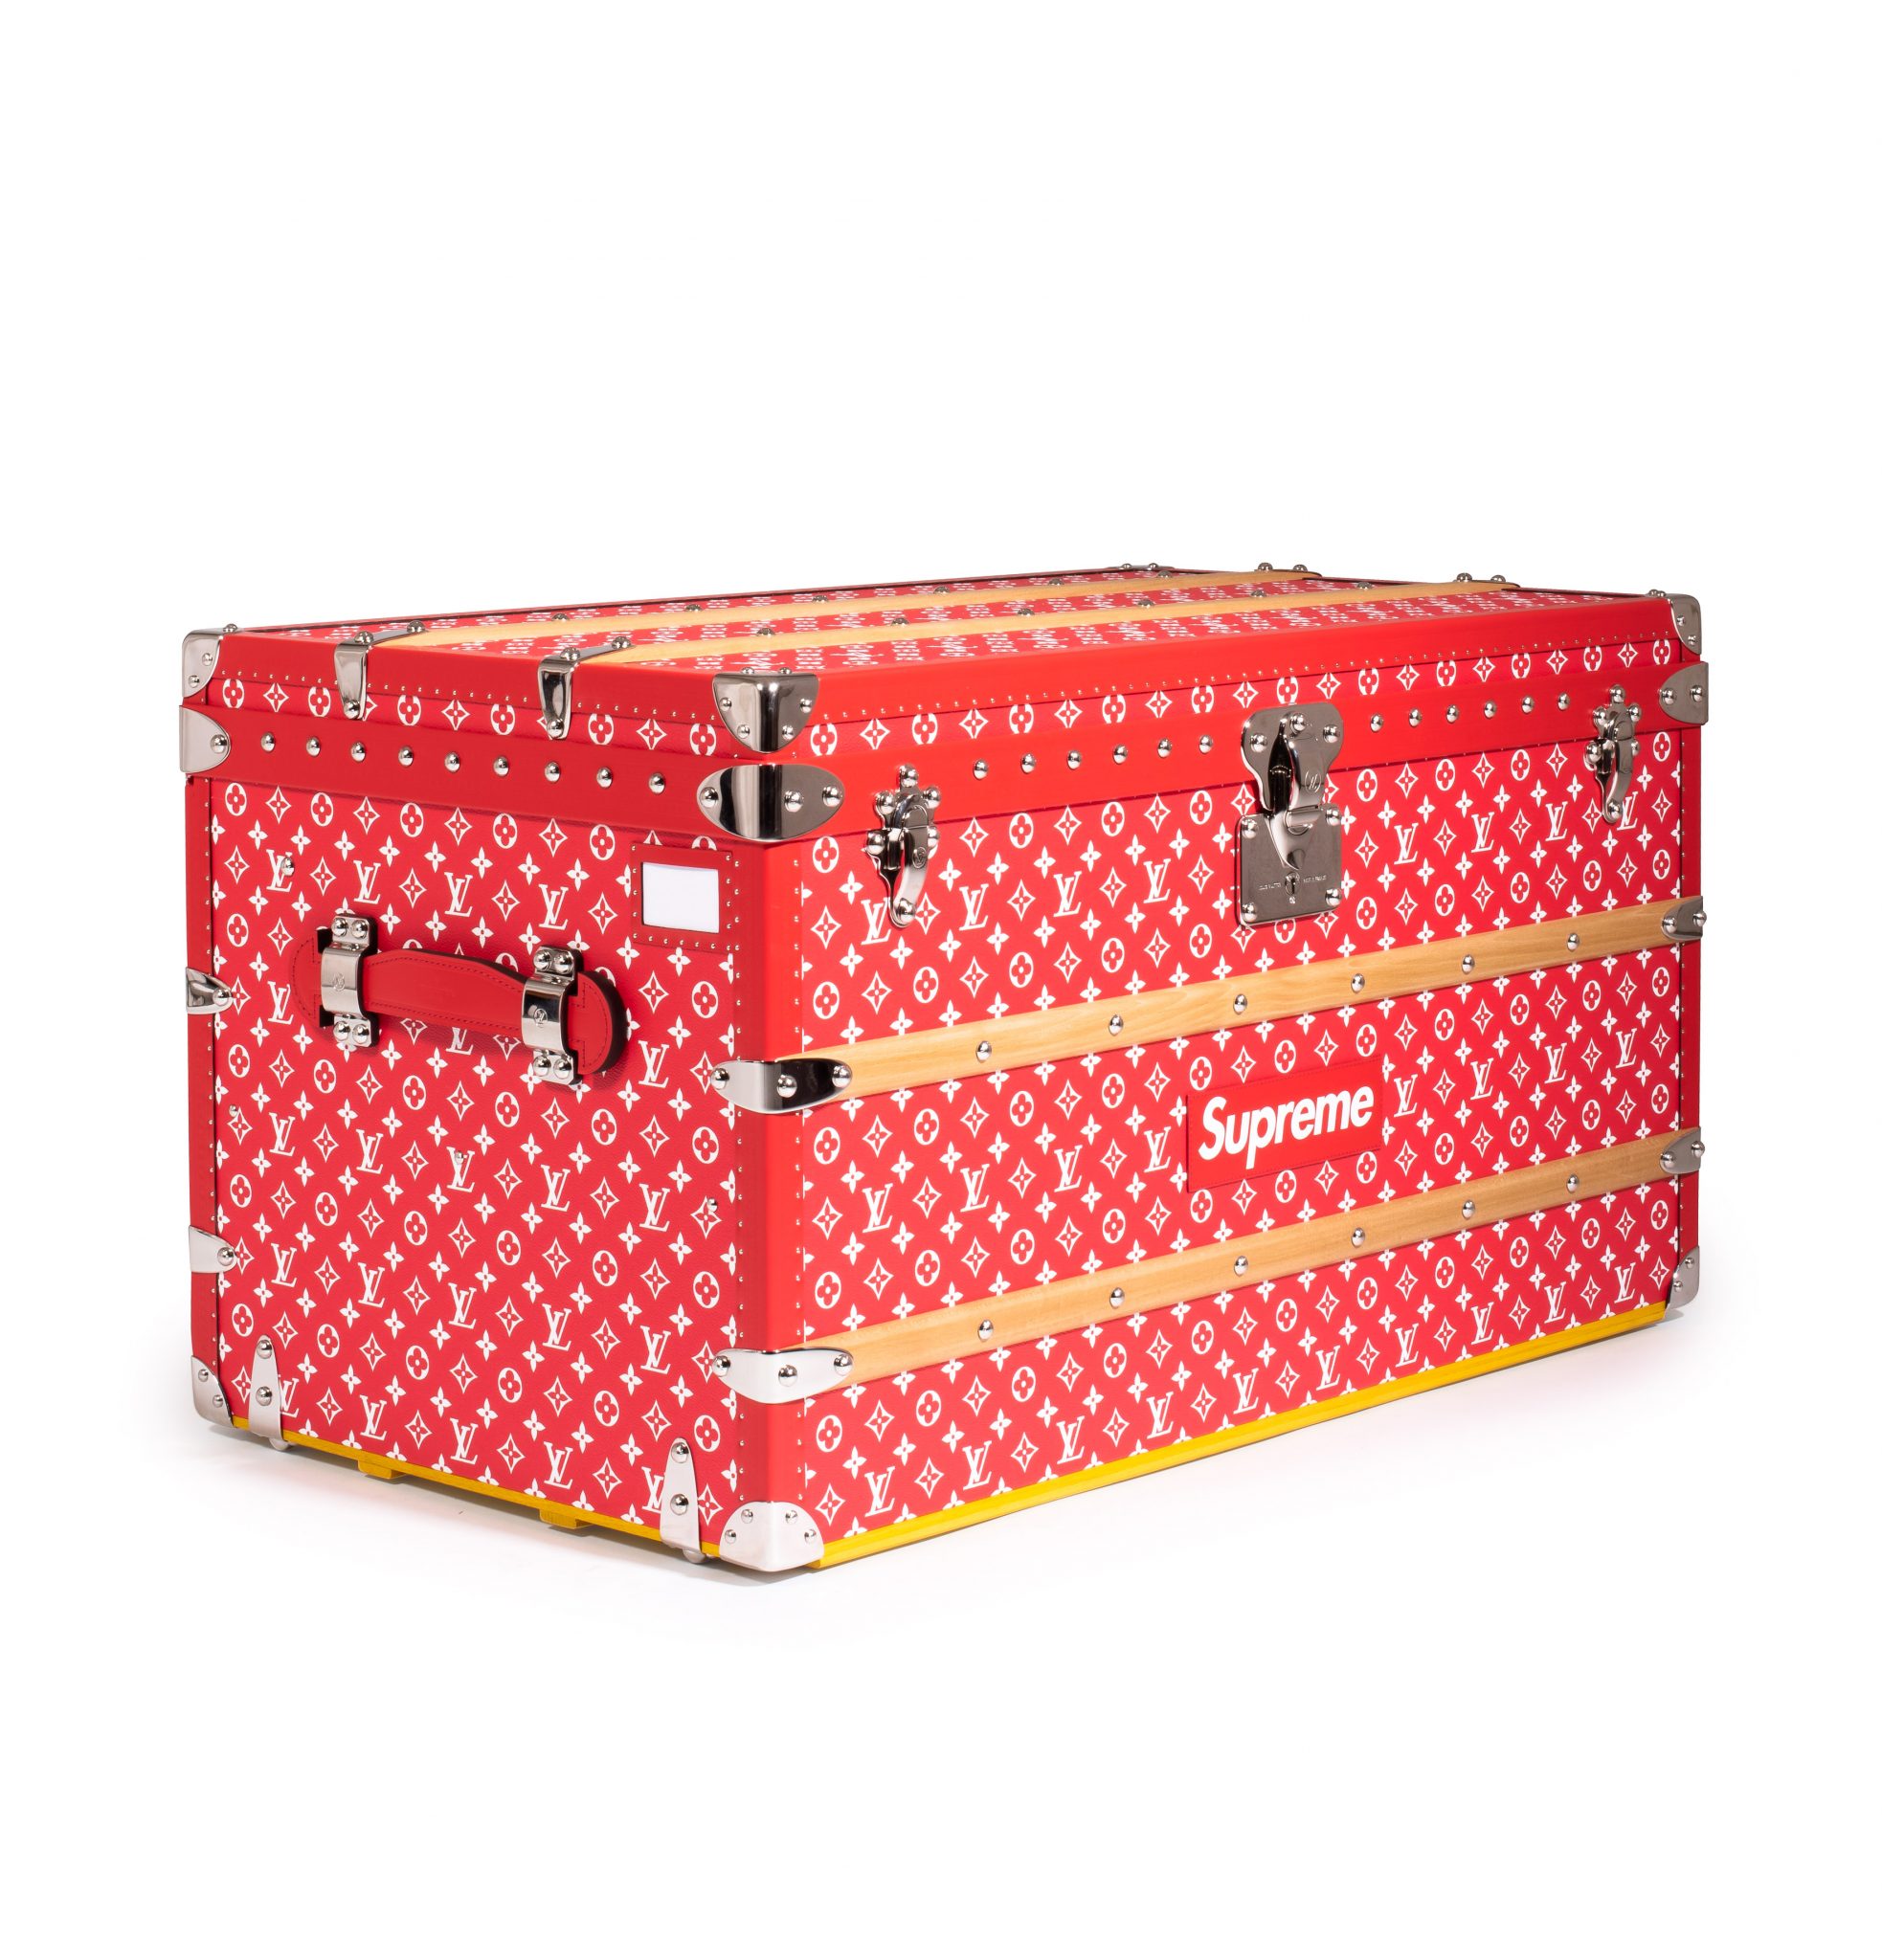 Supreme X Lv Skateboard Trunk | Confederated Tribes of the Umatilla Indian Reservation